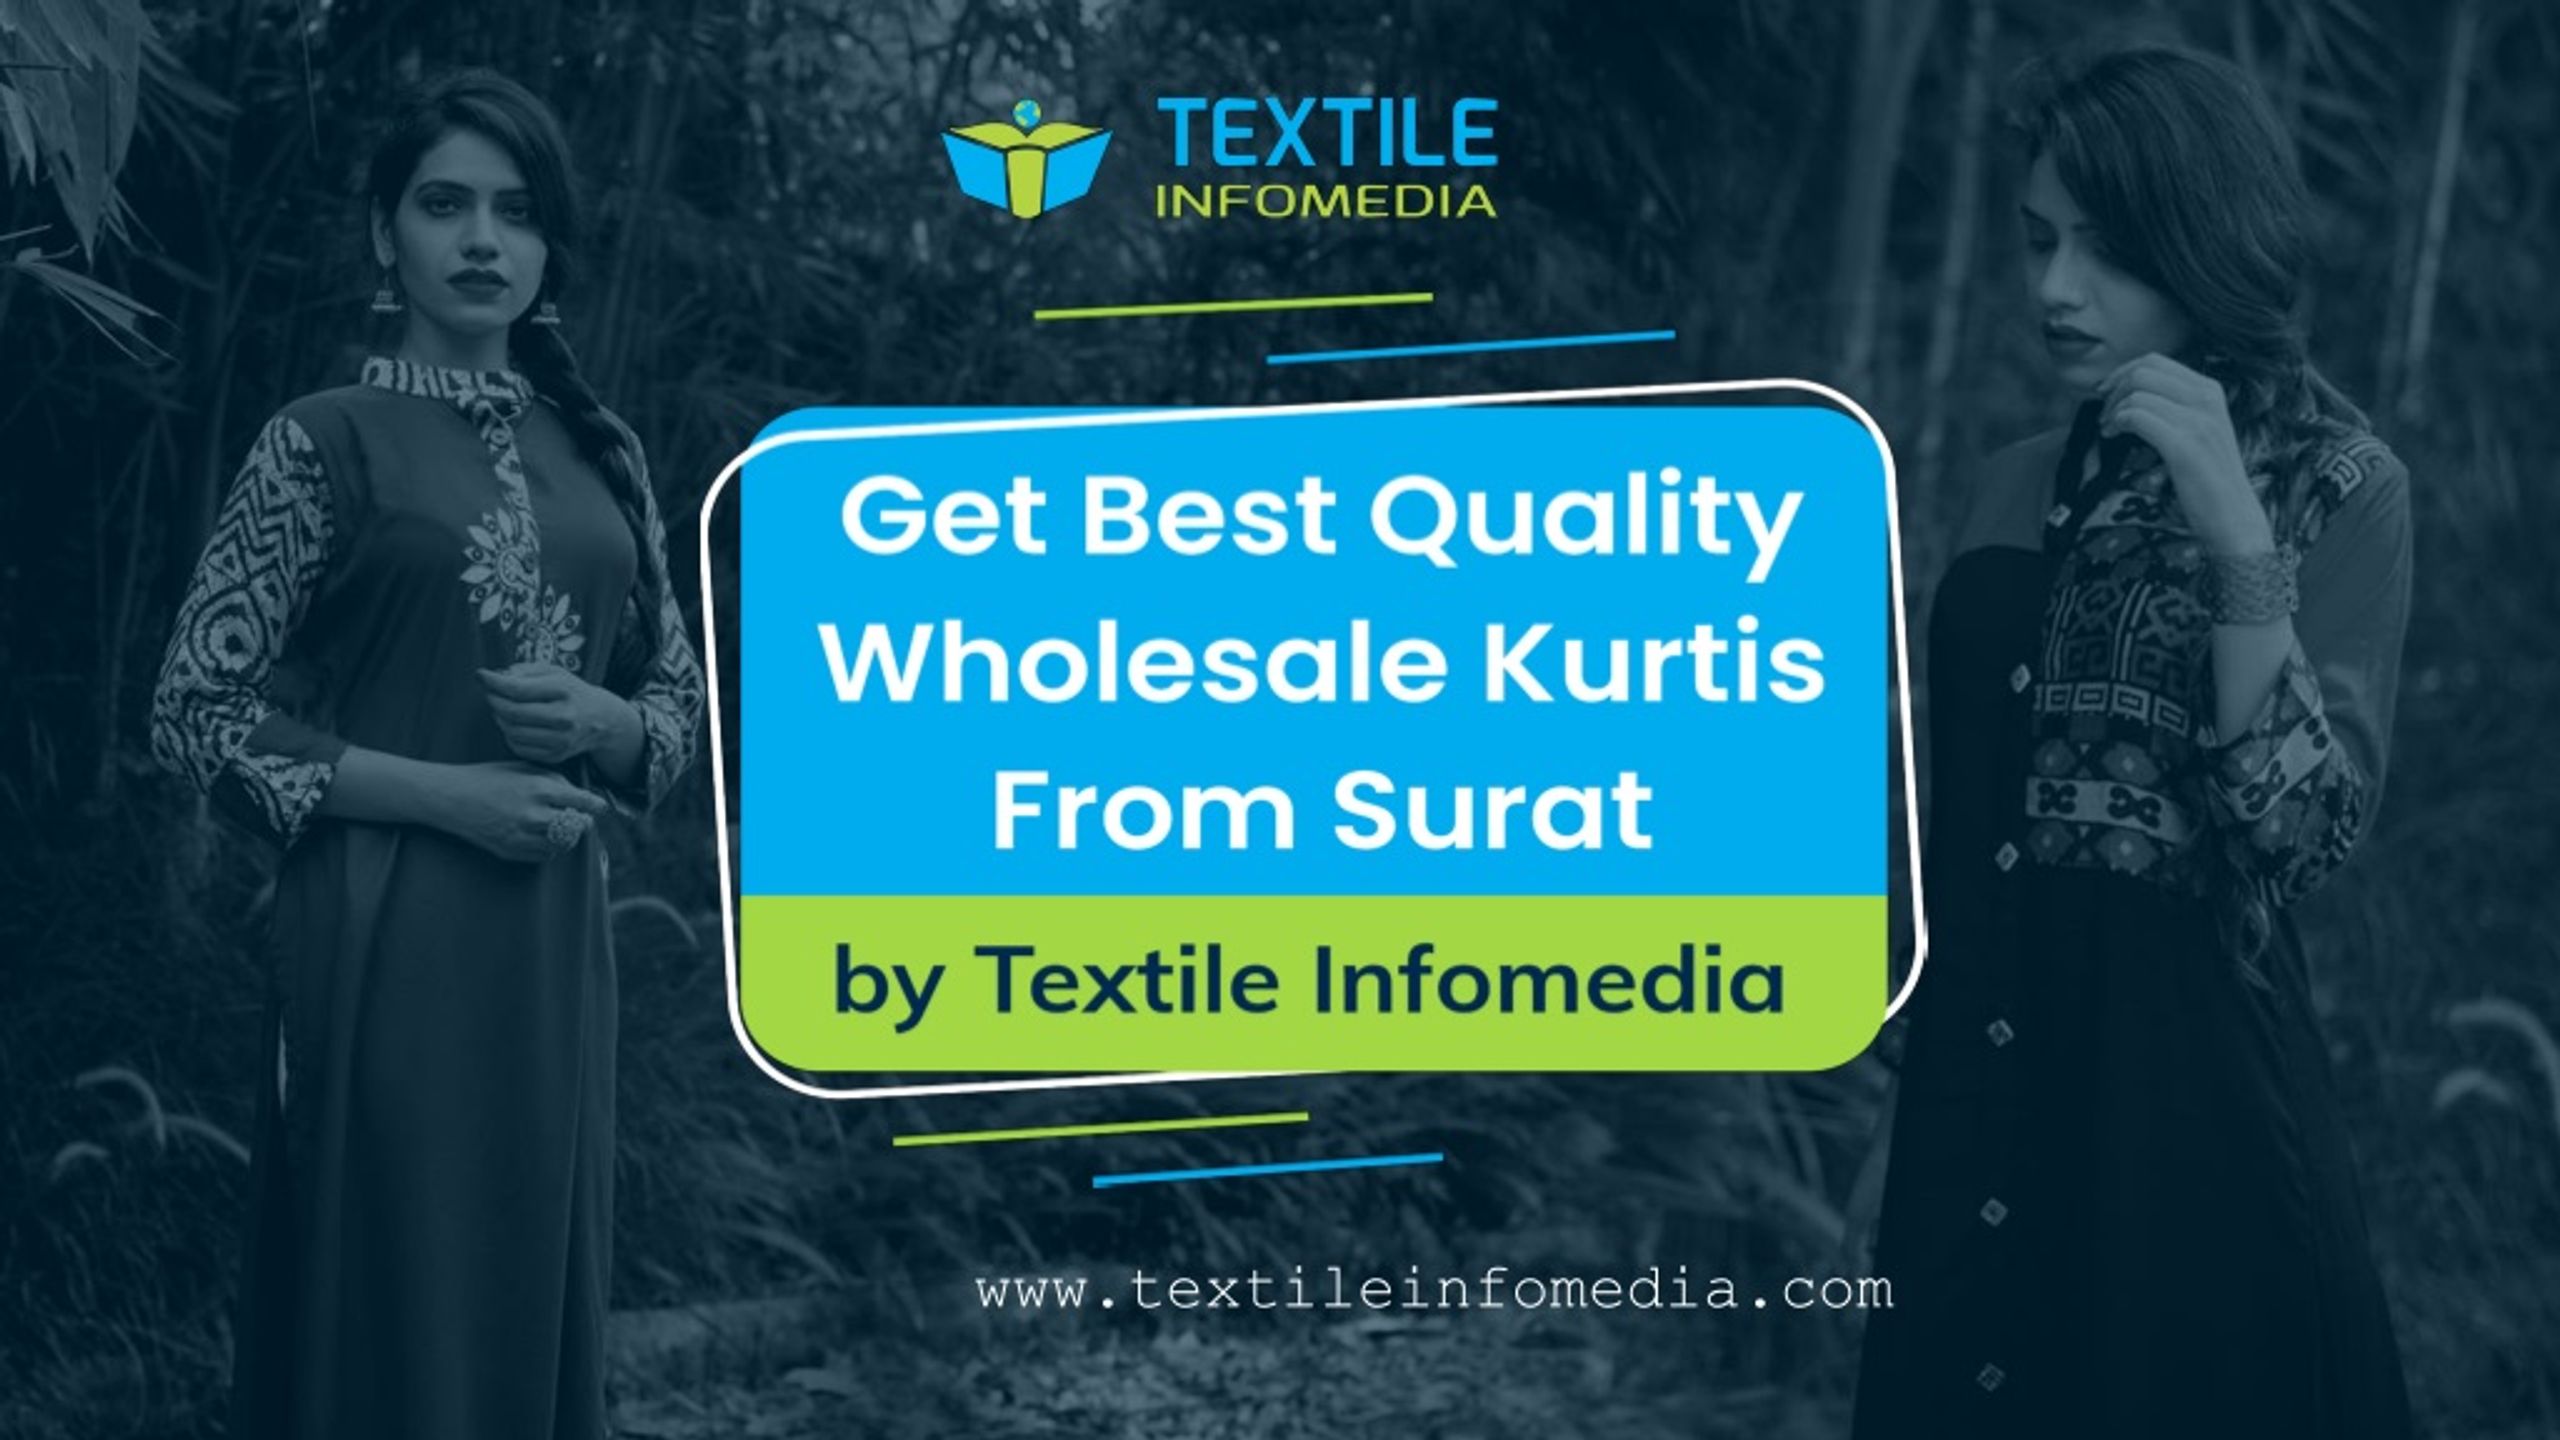 Top 5 Western wear manufacturers and suppliers in India – Textile InfoMedia